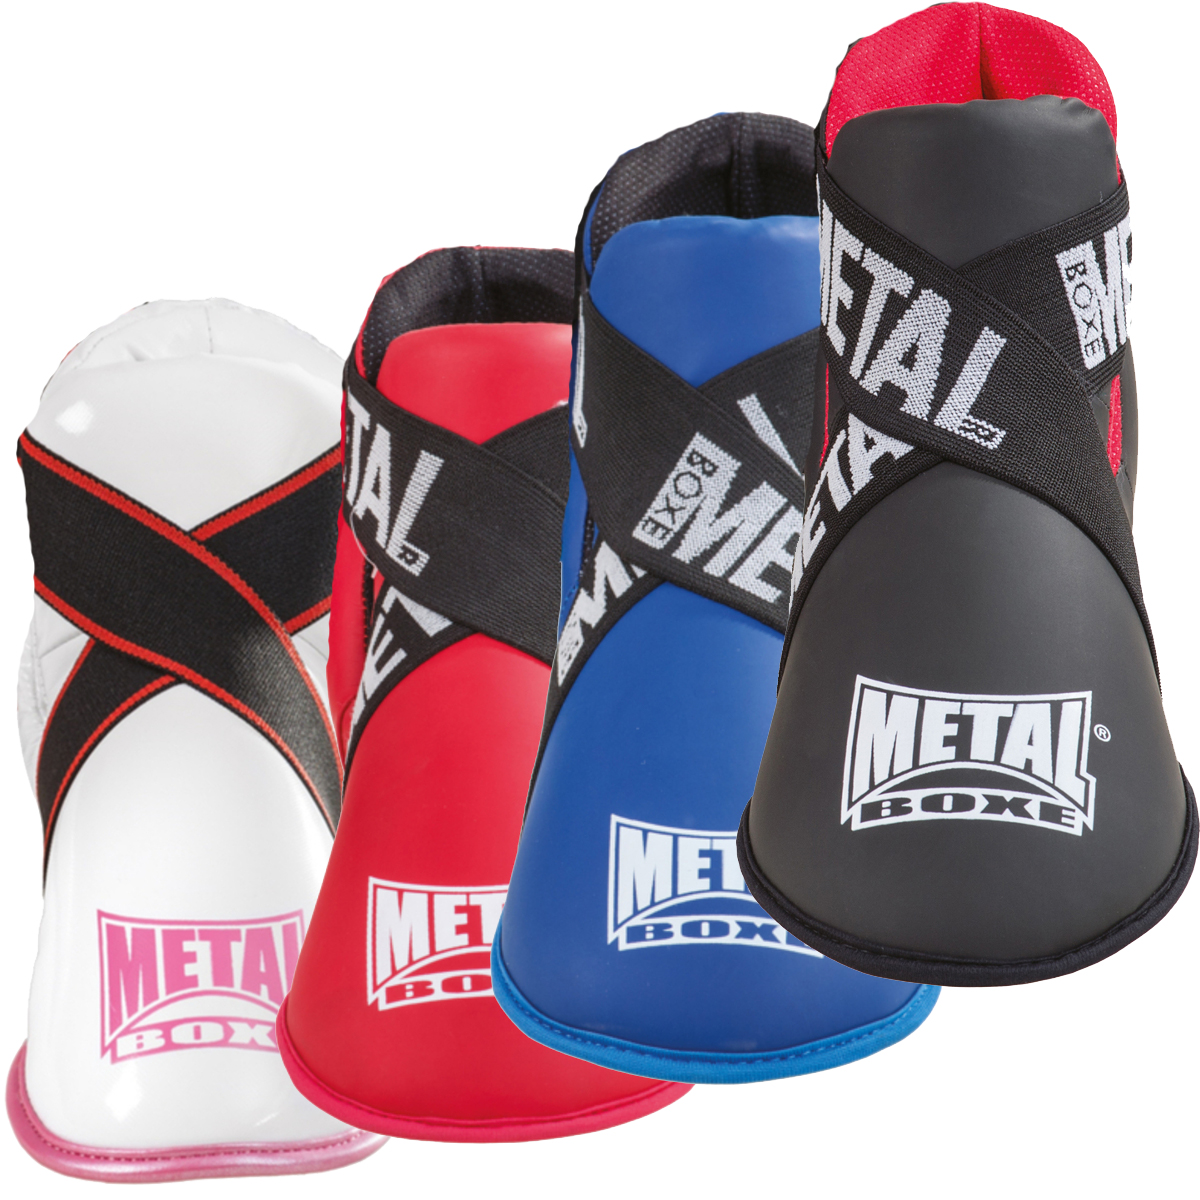 protege-pieds-full-contact-metal-boxe-mb165-full